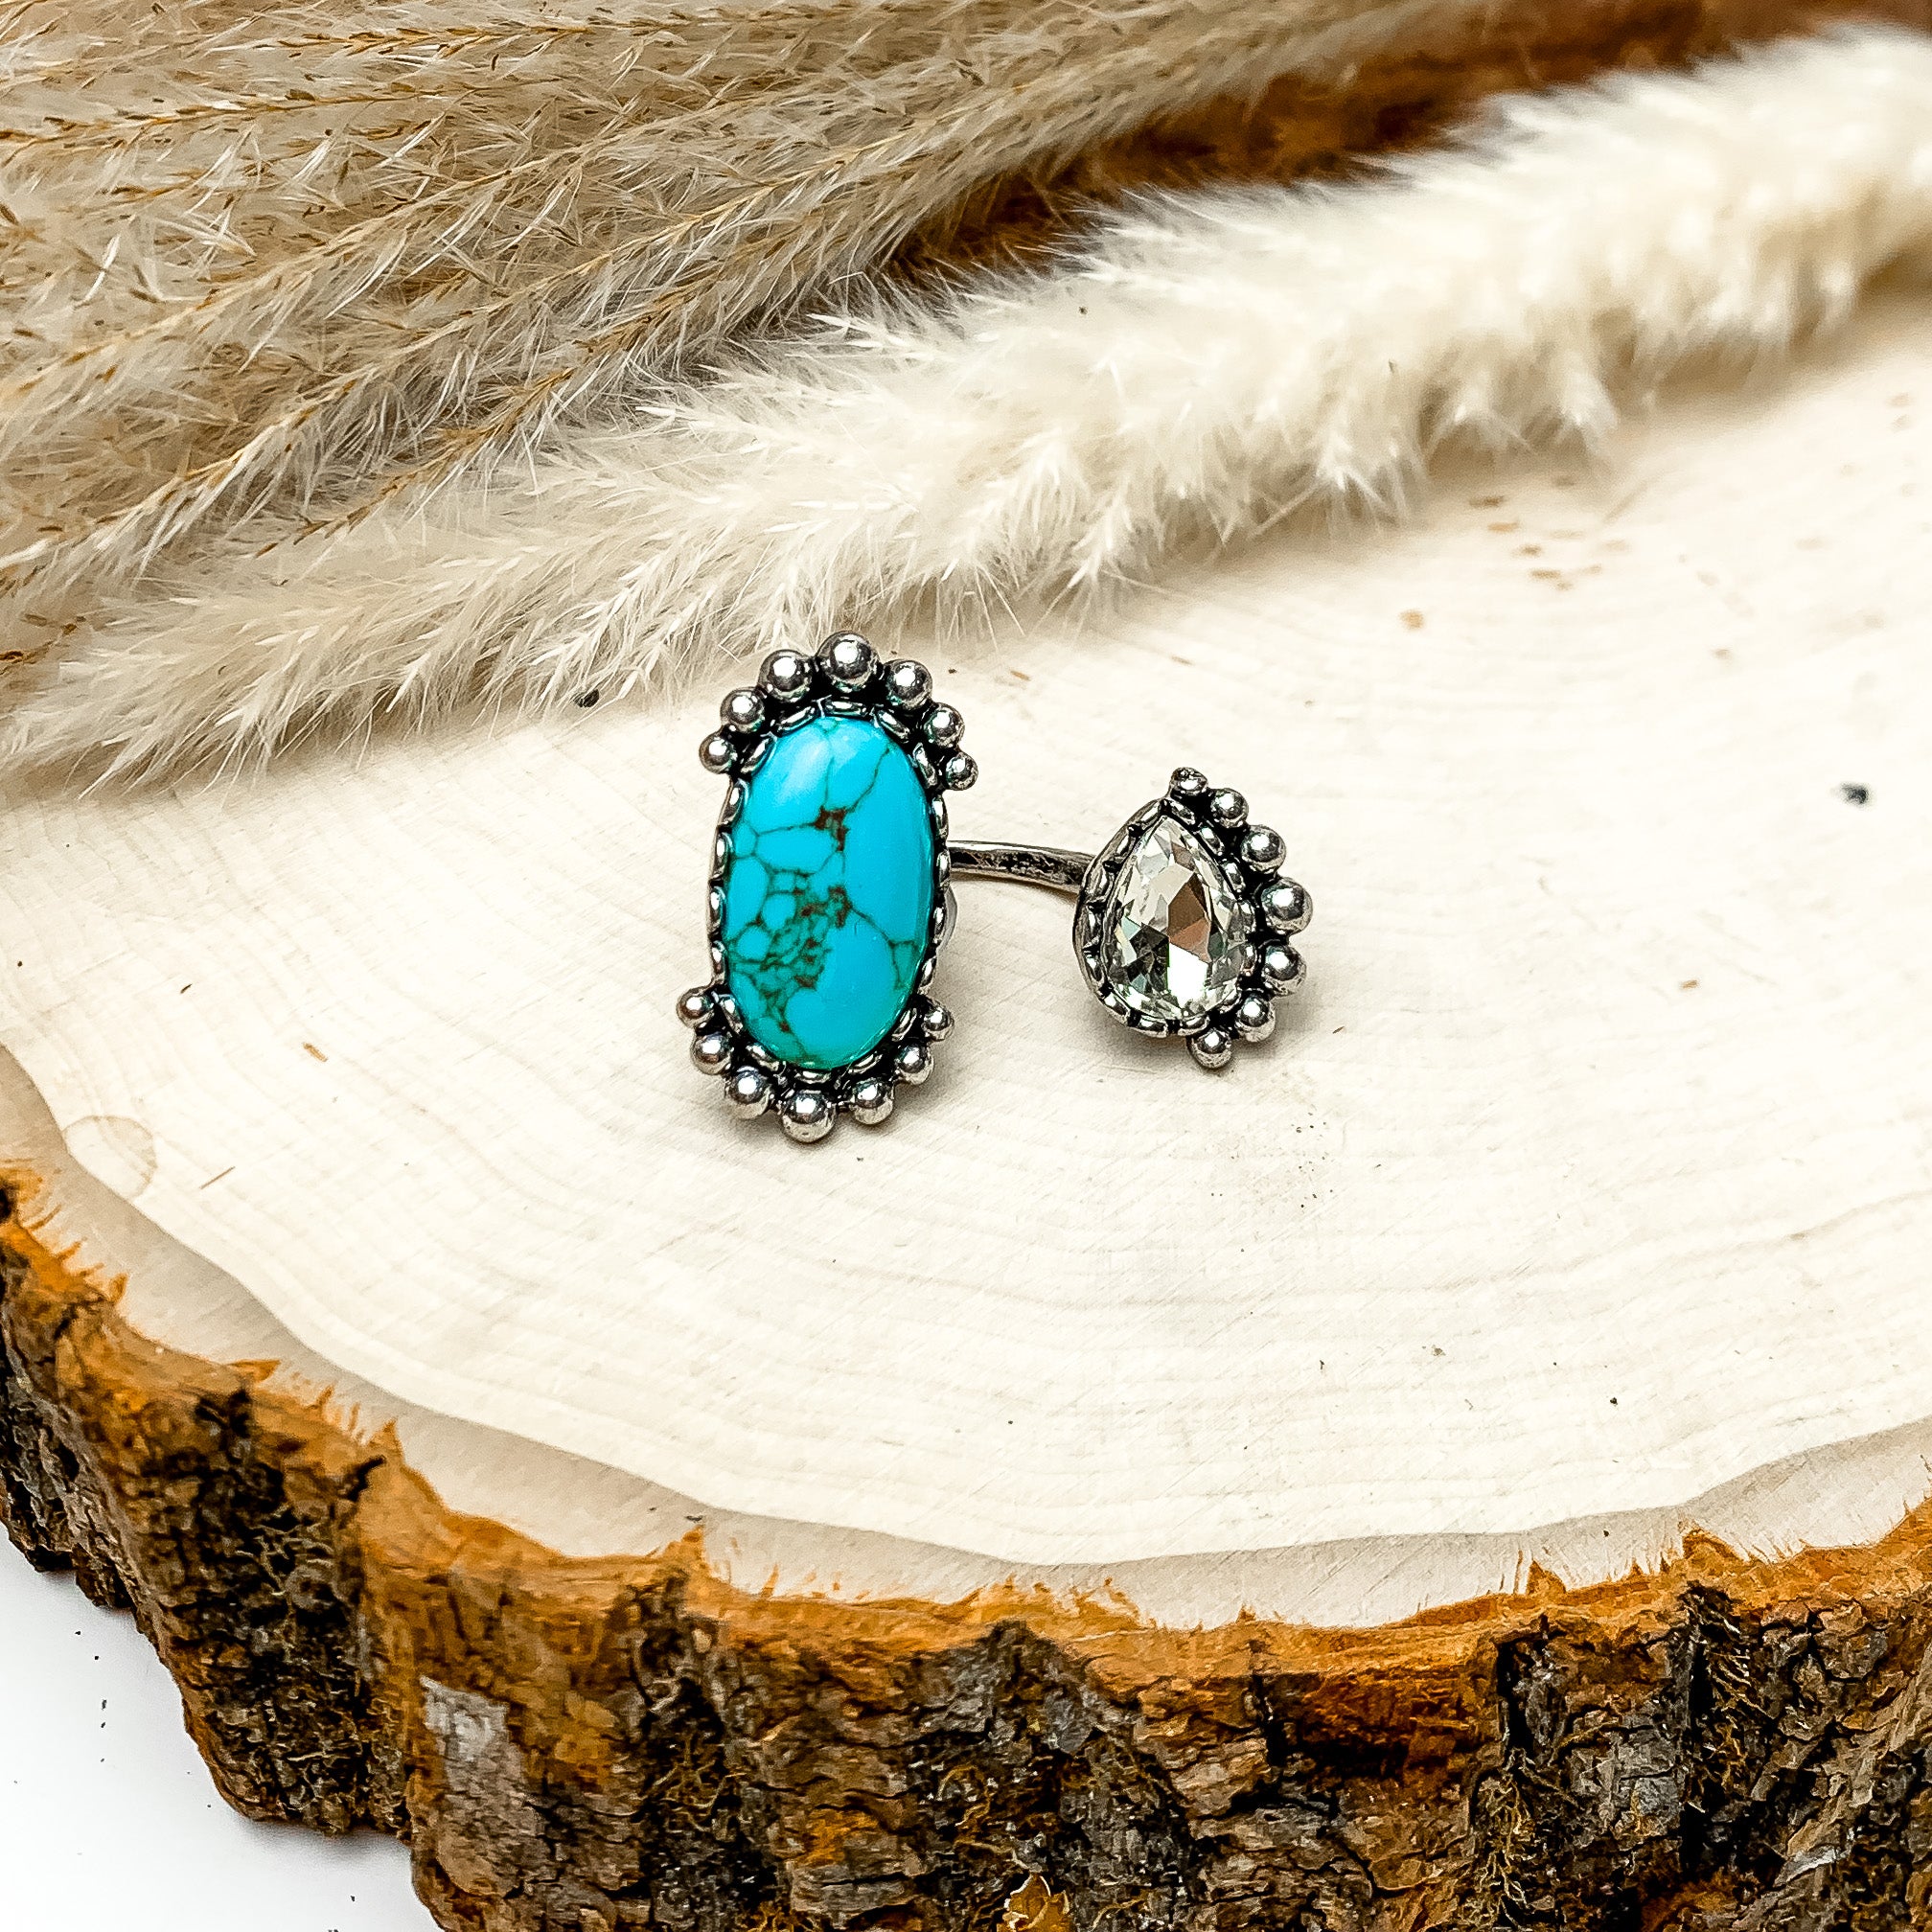 Duo Finger Ring With Turquoise Blue Stone and Clear Crystal. The ring is pictured on a wood piece with feathers behind it.